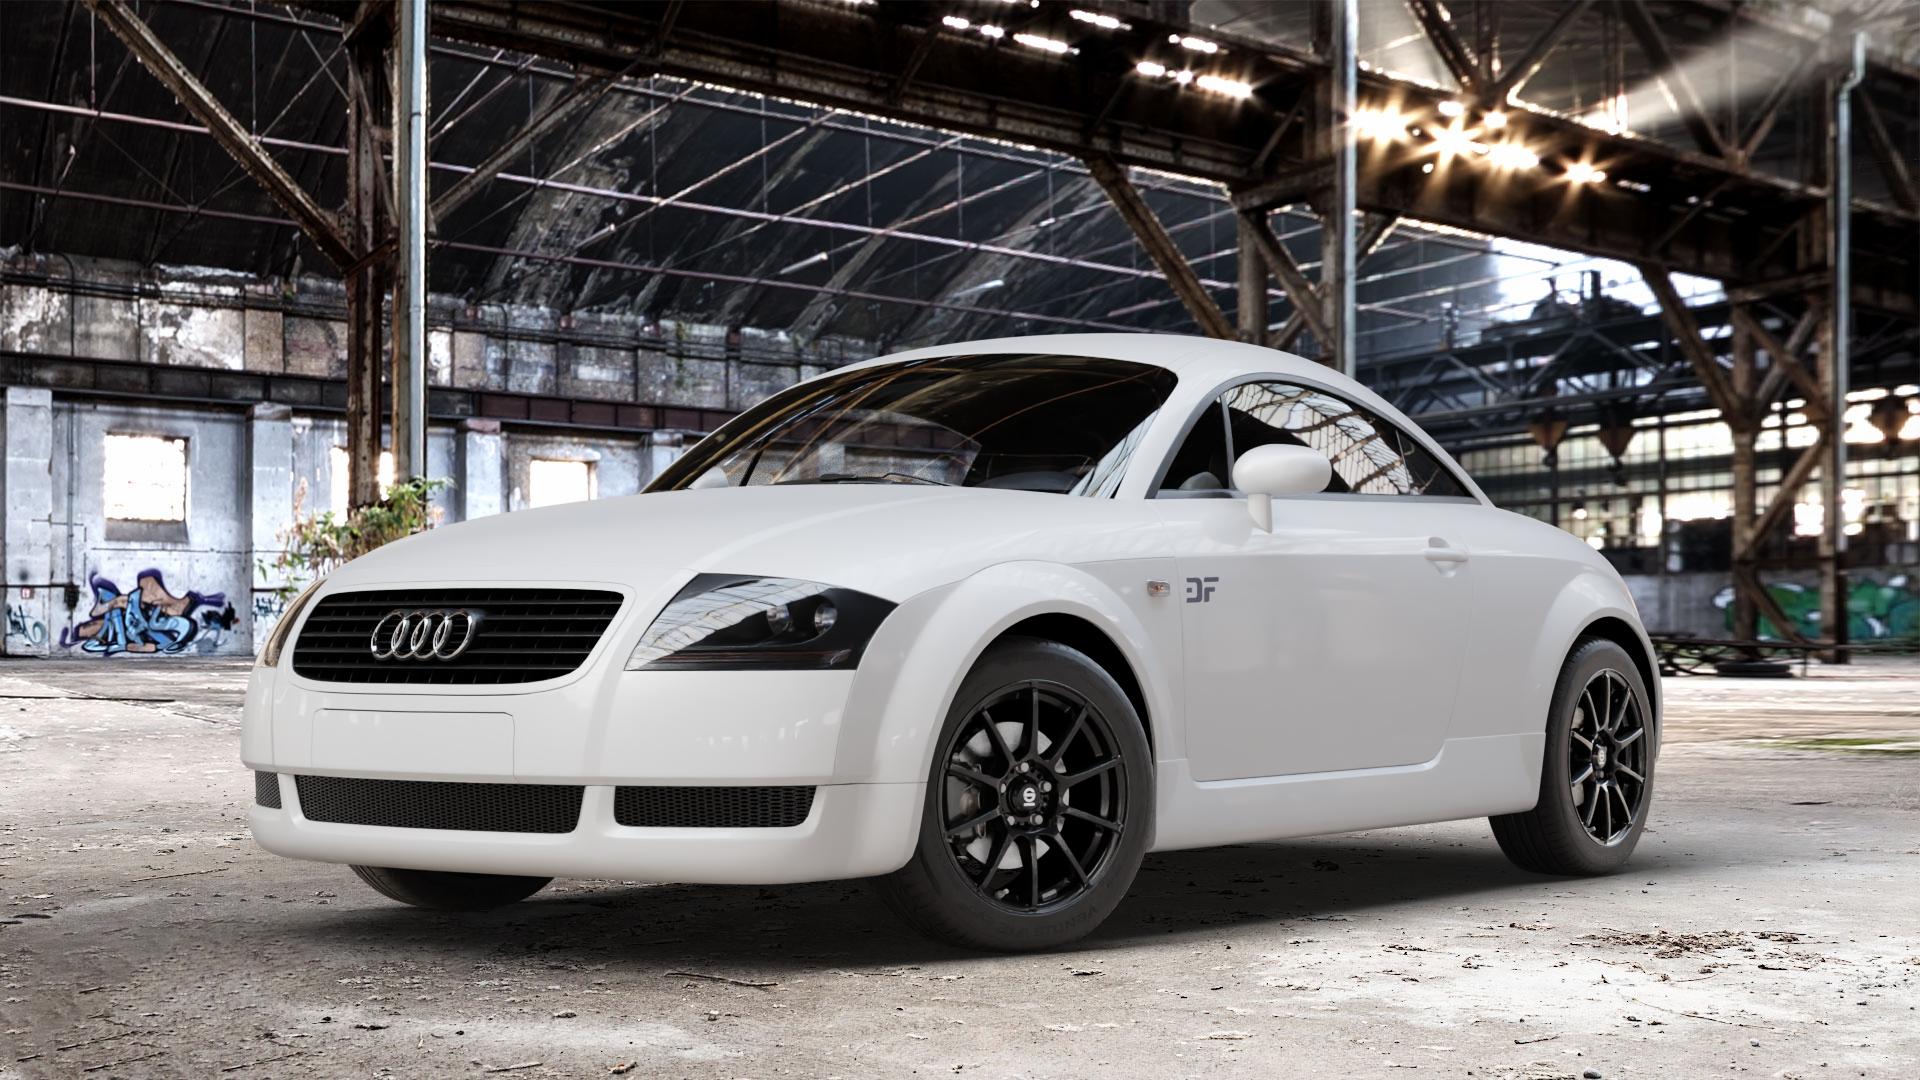 Audi - TT I Type 8N (Coupé) Wheels and Tyre Packages